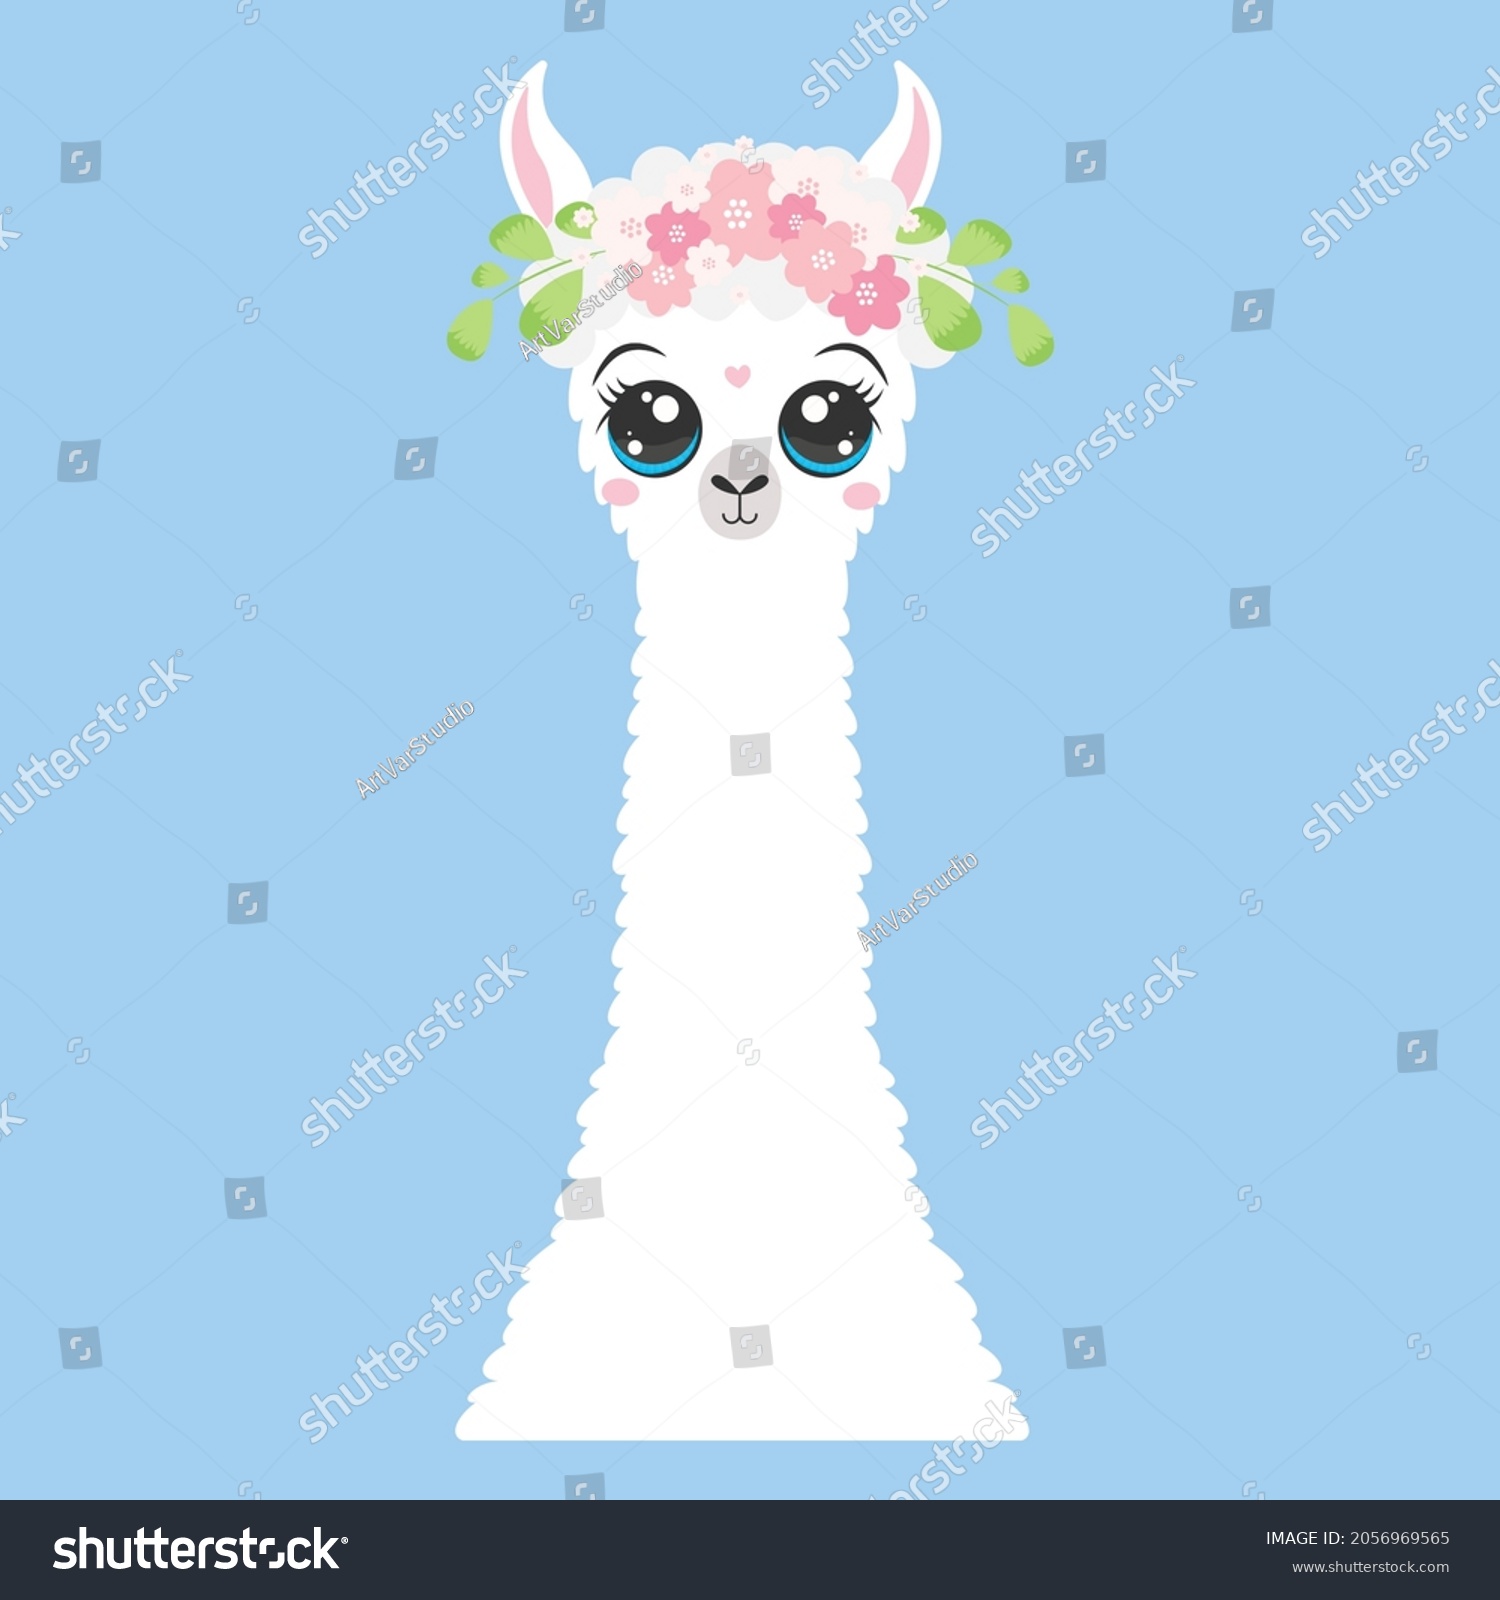 SVG of Vector llama illustration. Cartoon clipart llama for kids activity t shirt print, icon, logo, label, patch or sticker. Concept for children print. svg